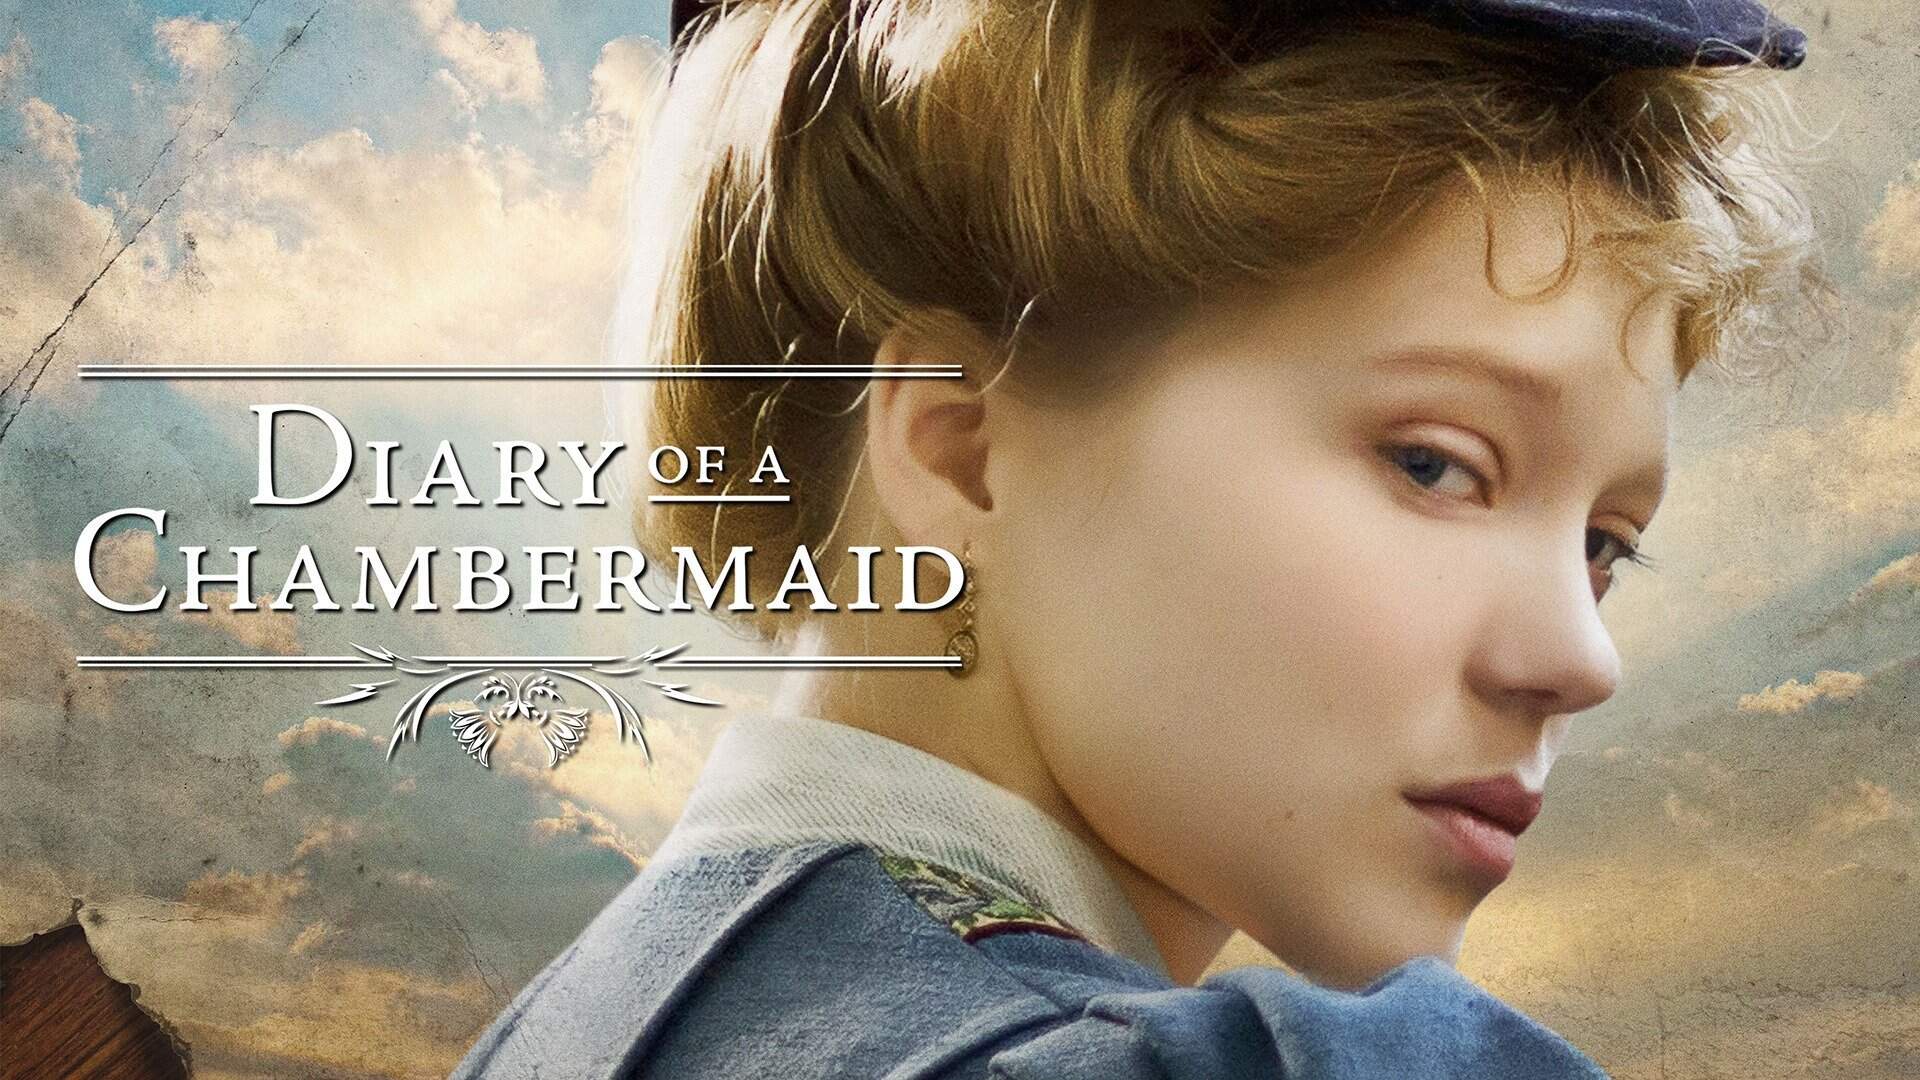 37-facts-about-the-movie-diary-of-a-chambermaid